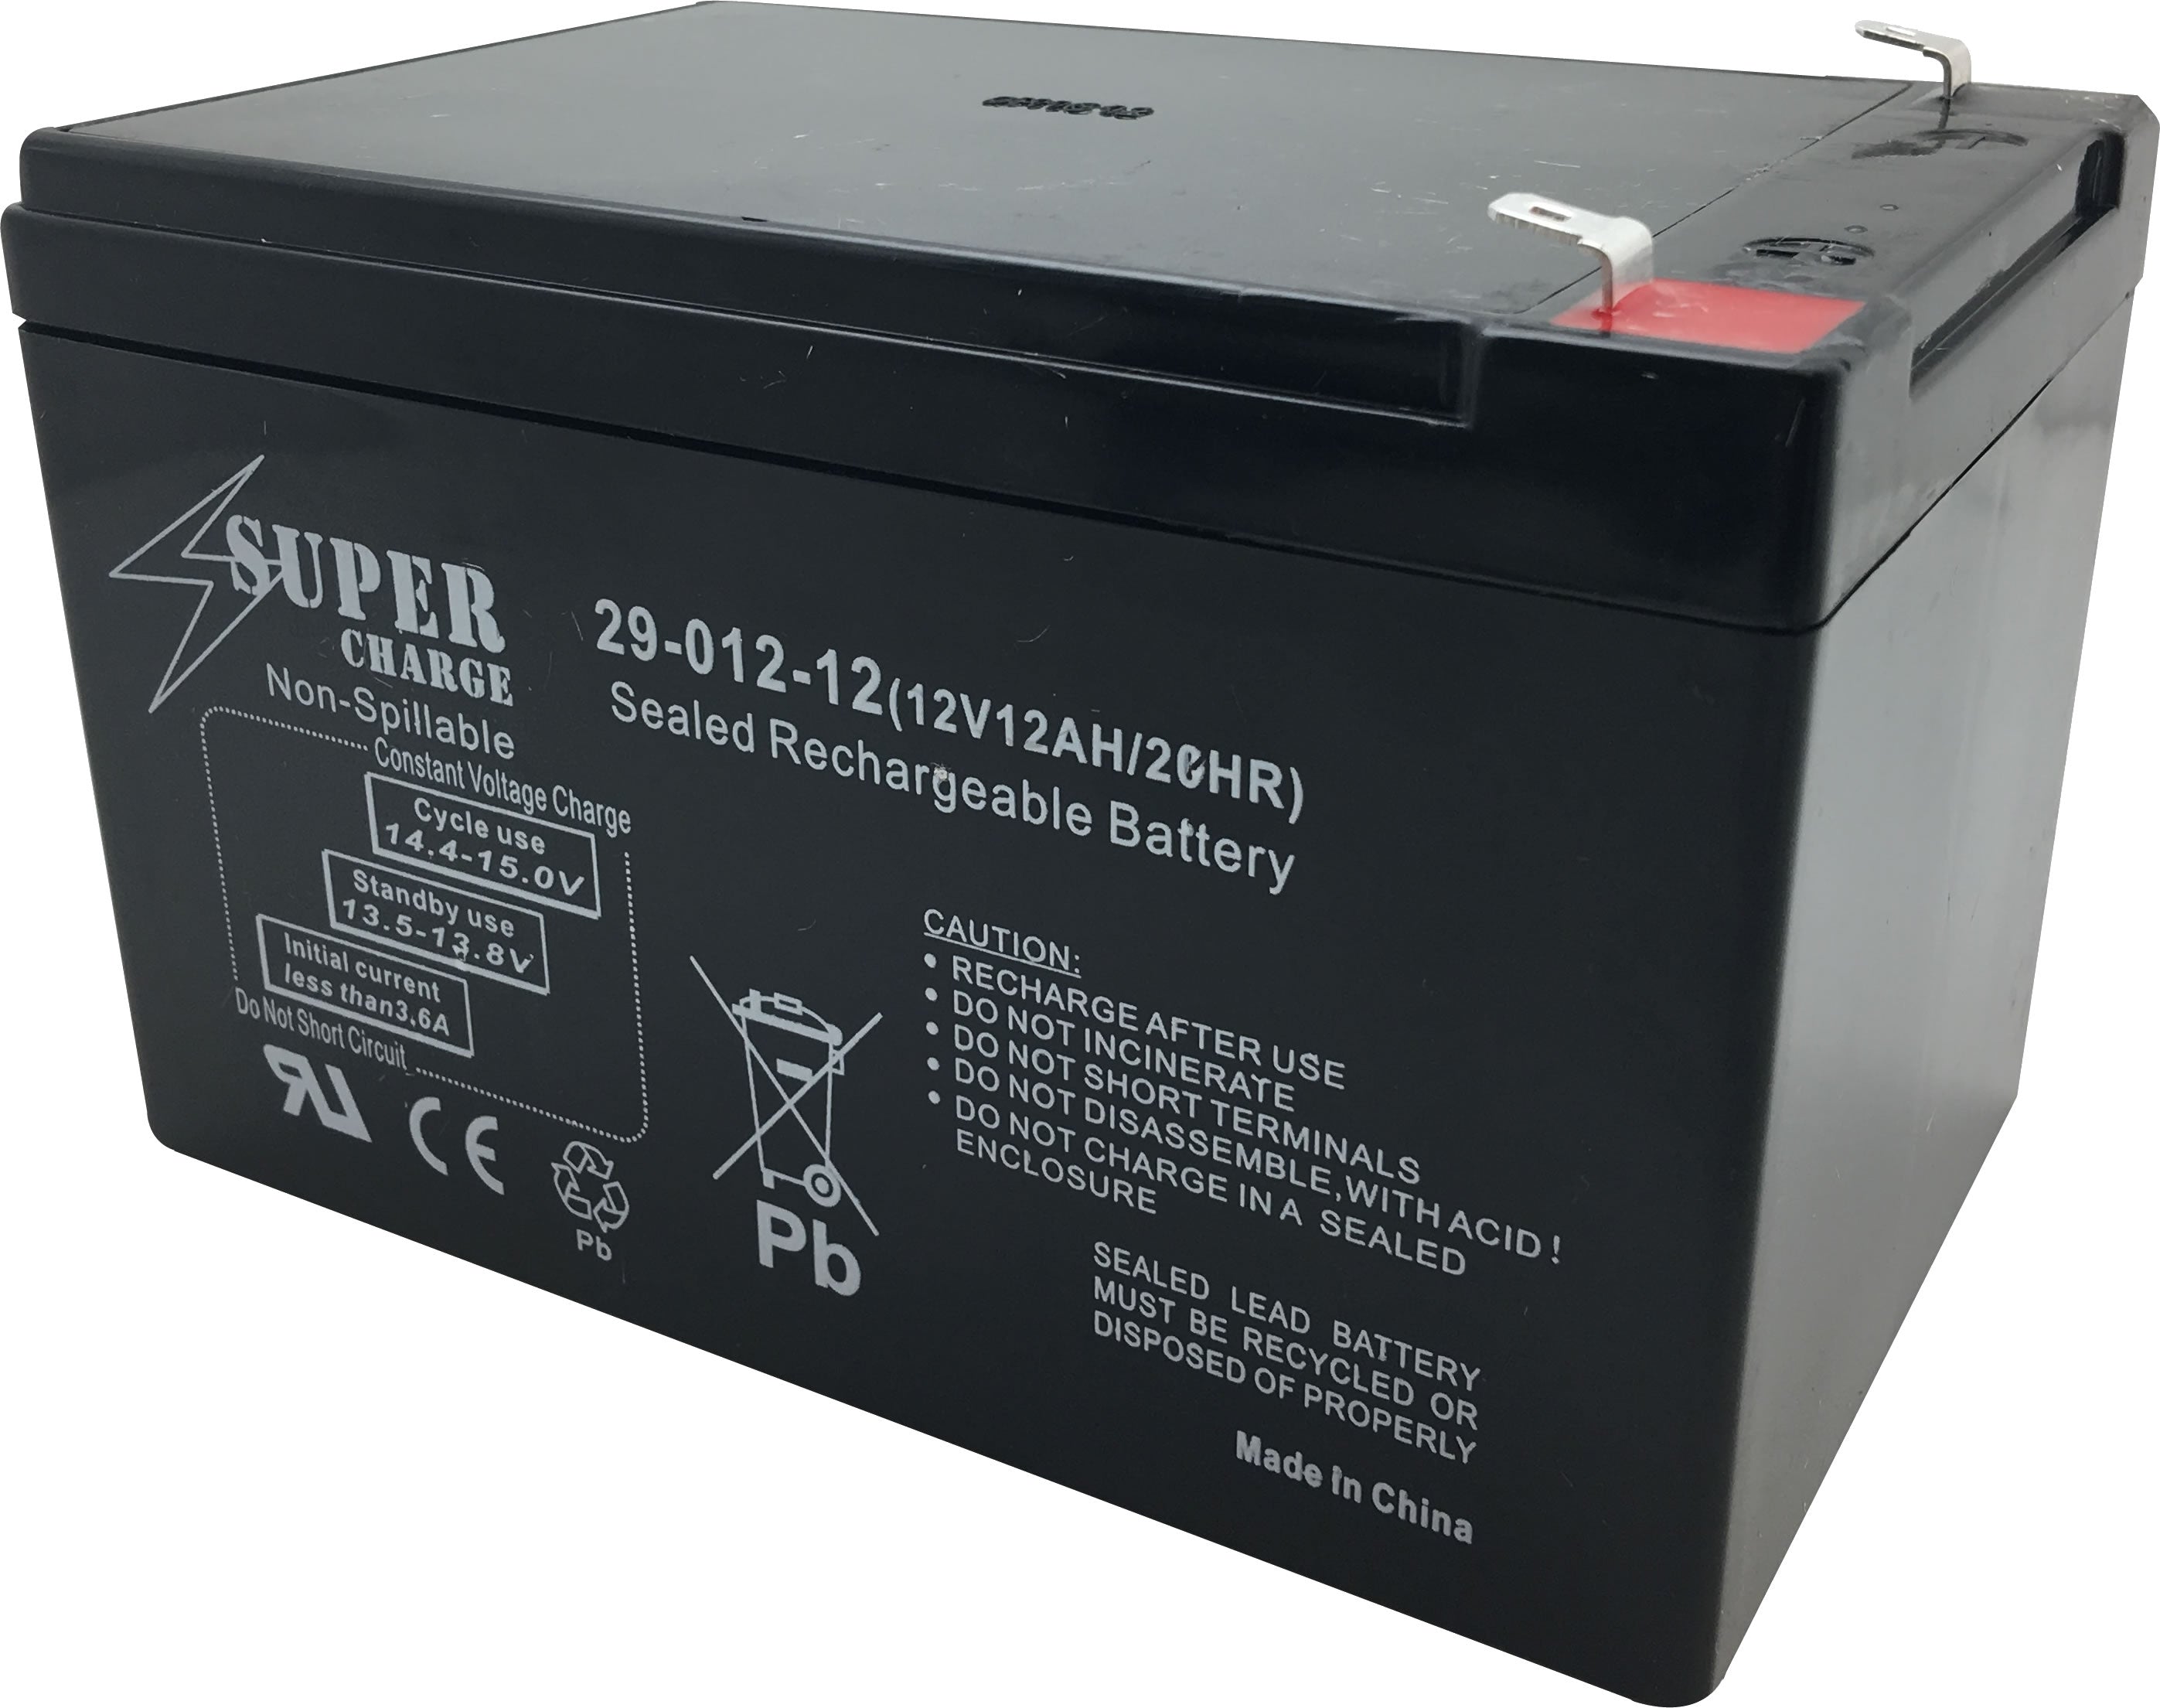 29-012-12 Rechargeable Battery 12V 12AH 20HR